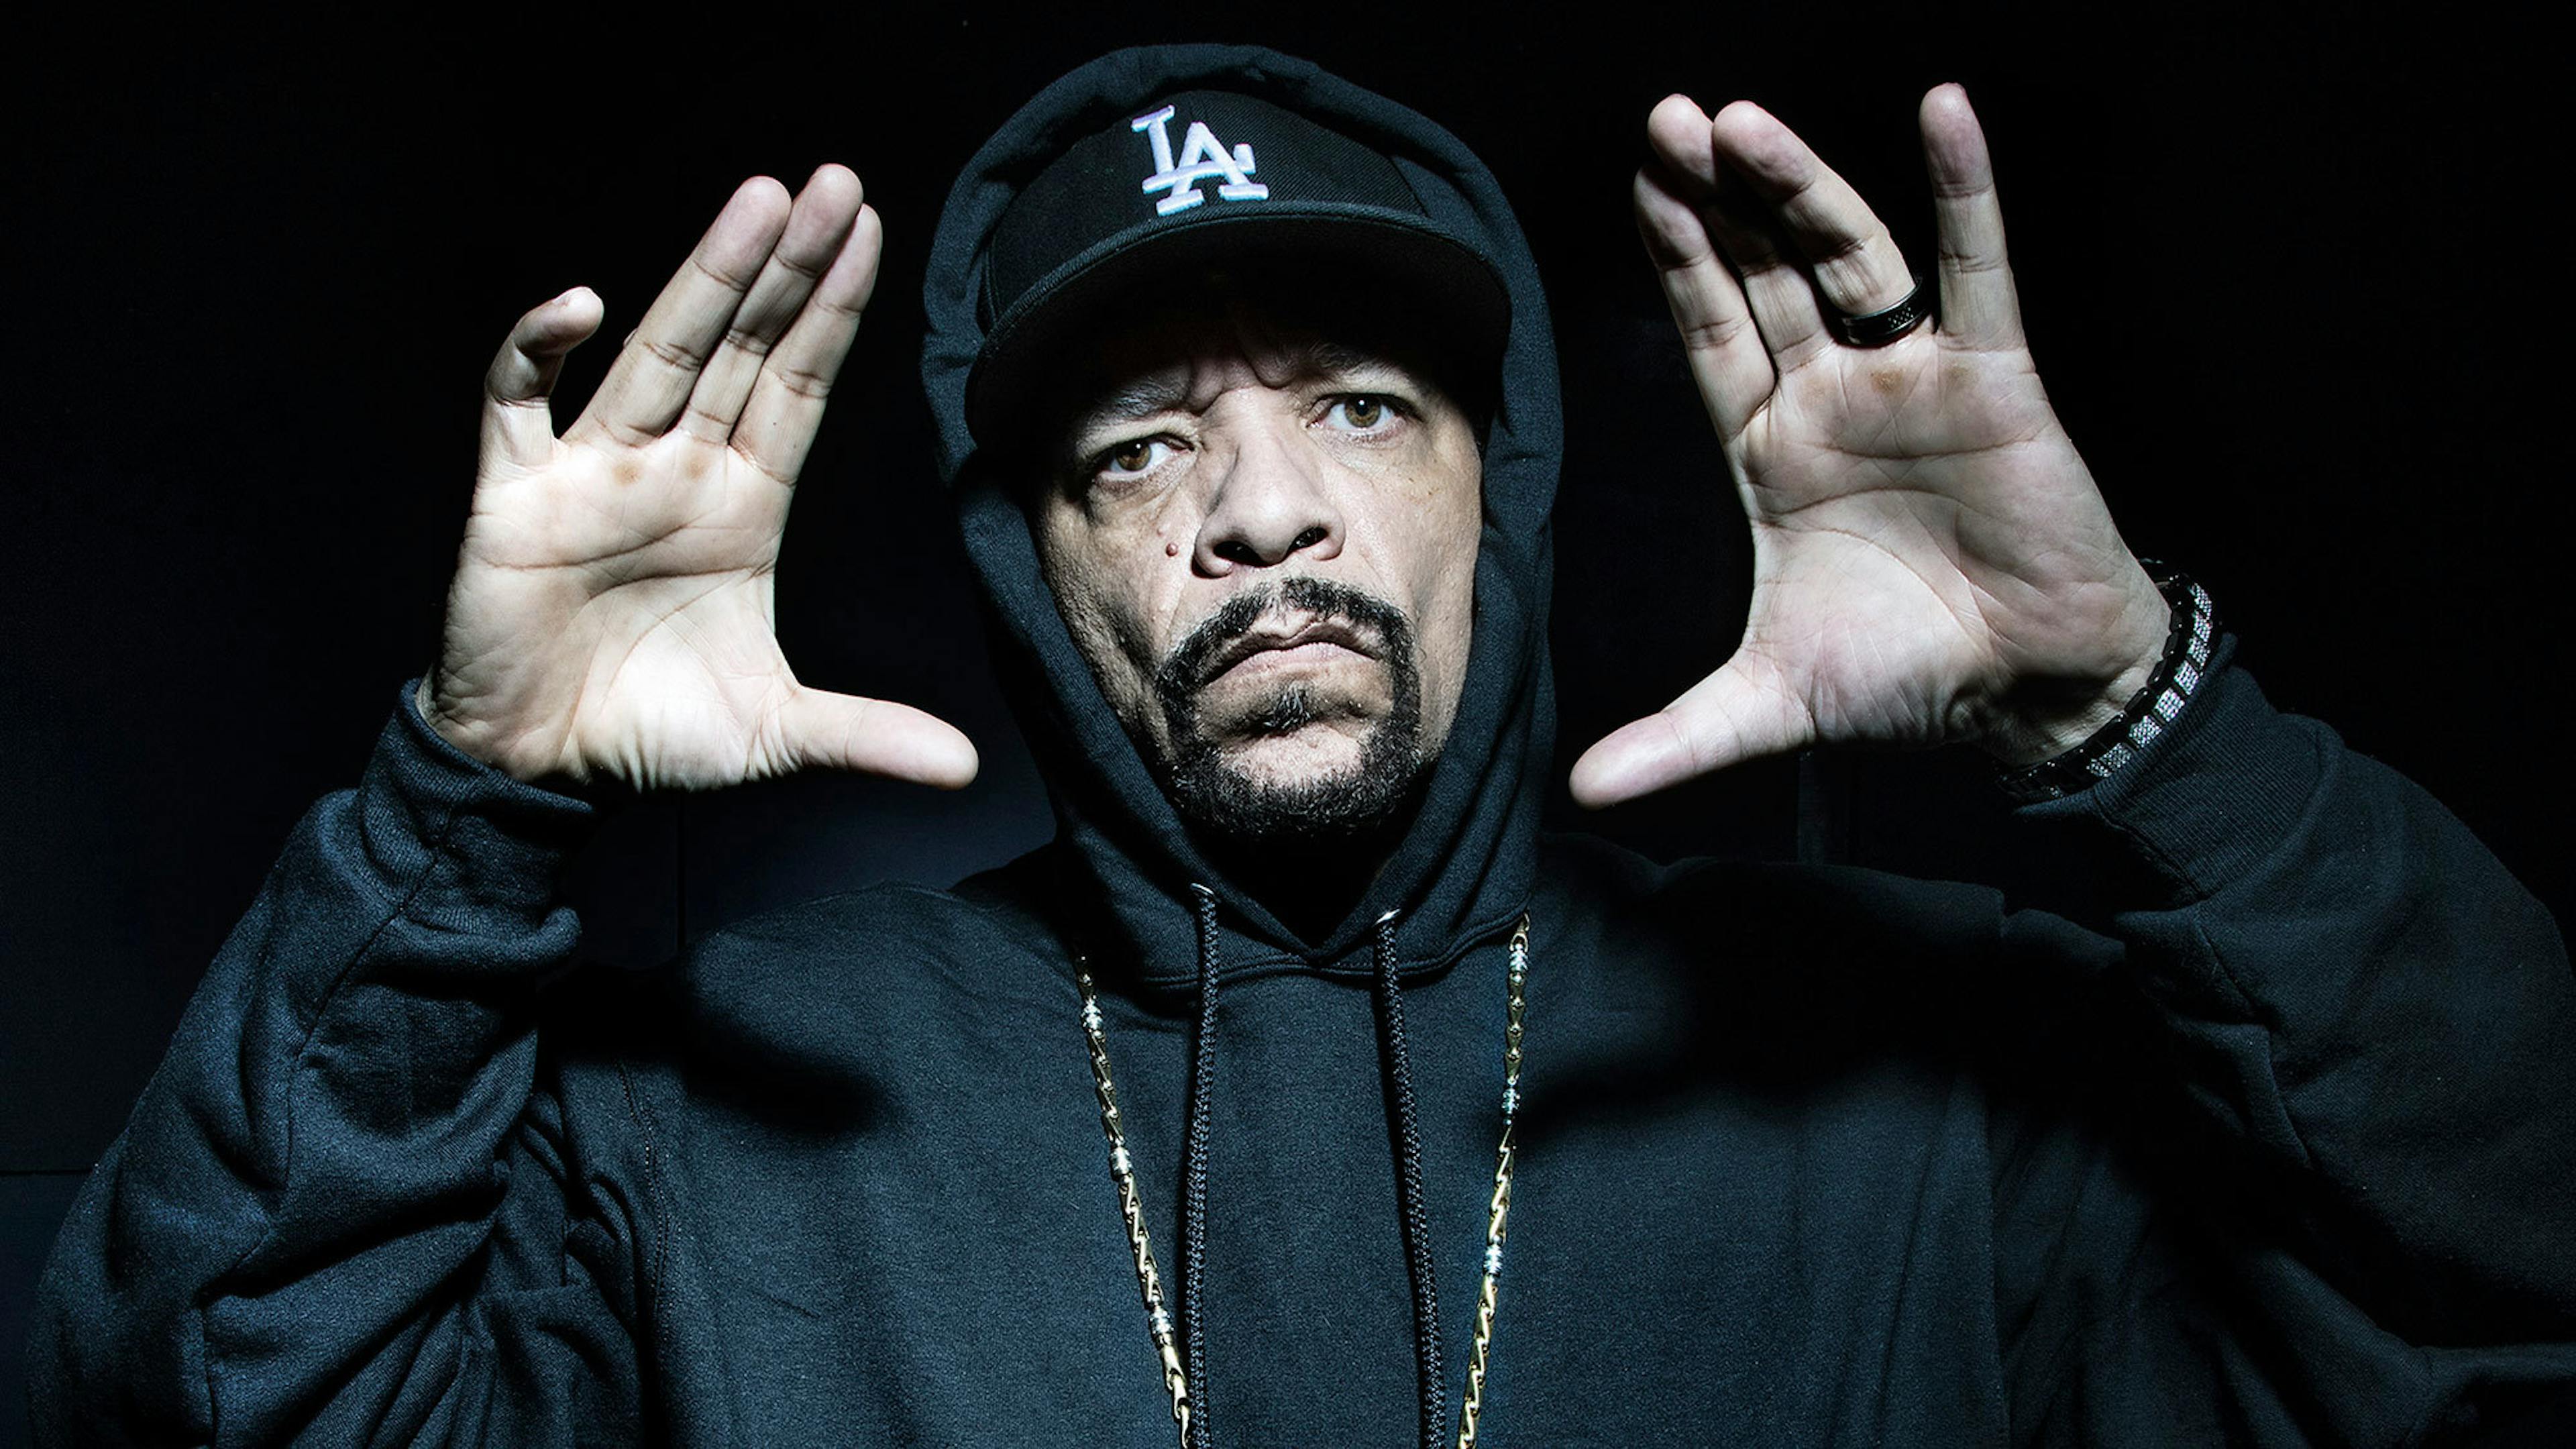 Ice-T On That Trapt Beef: "I’m Not Planning On Fighting Him, I Don’t Want To Hurt The Guy"